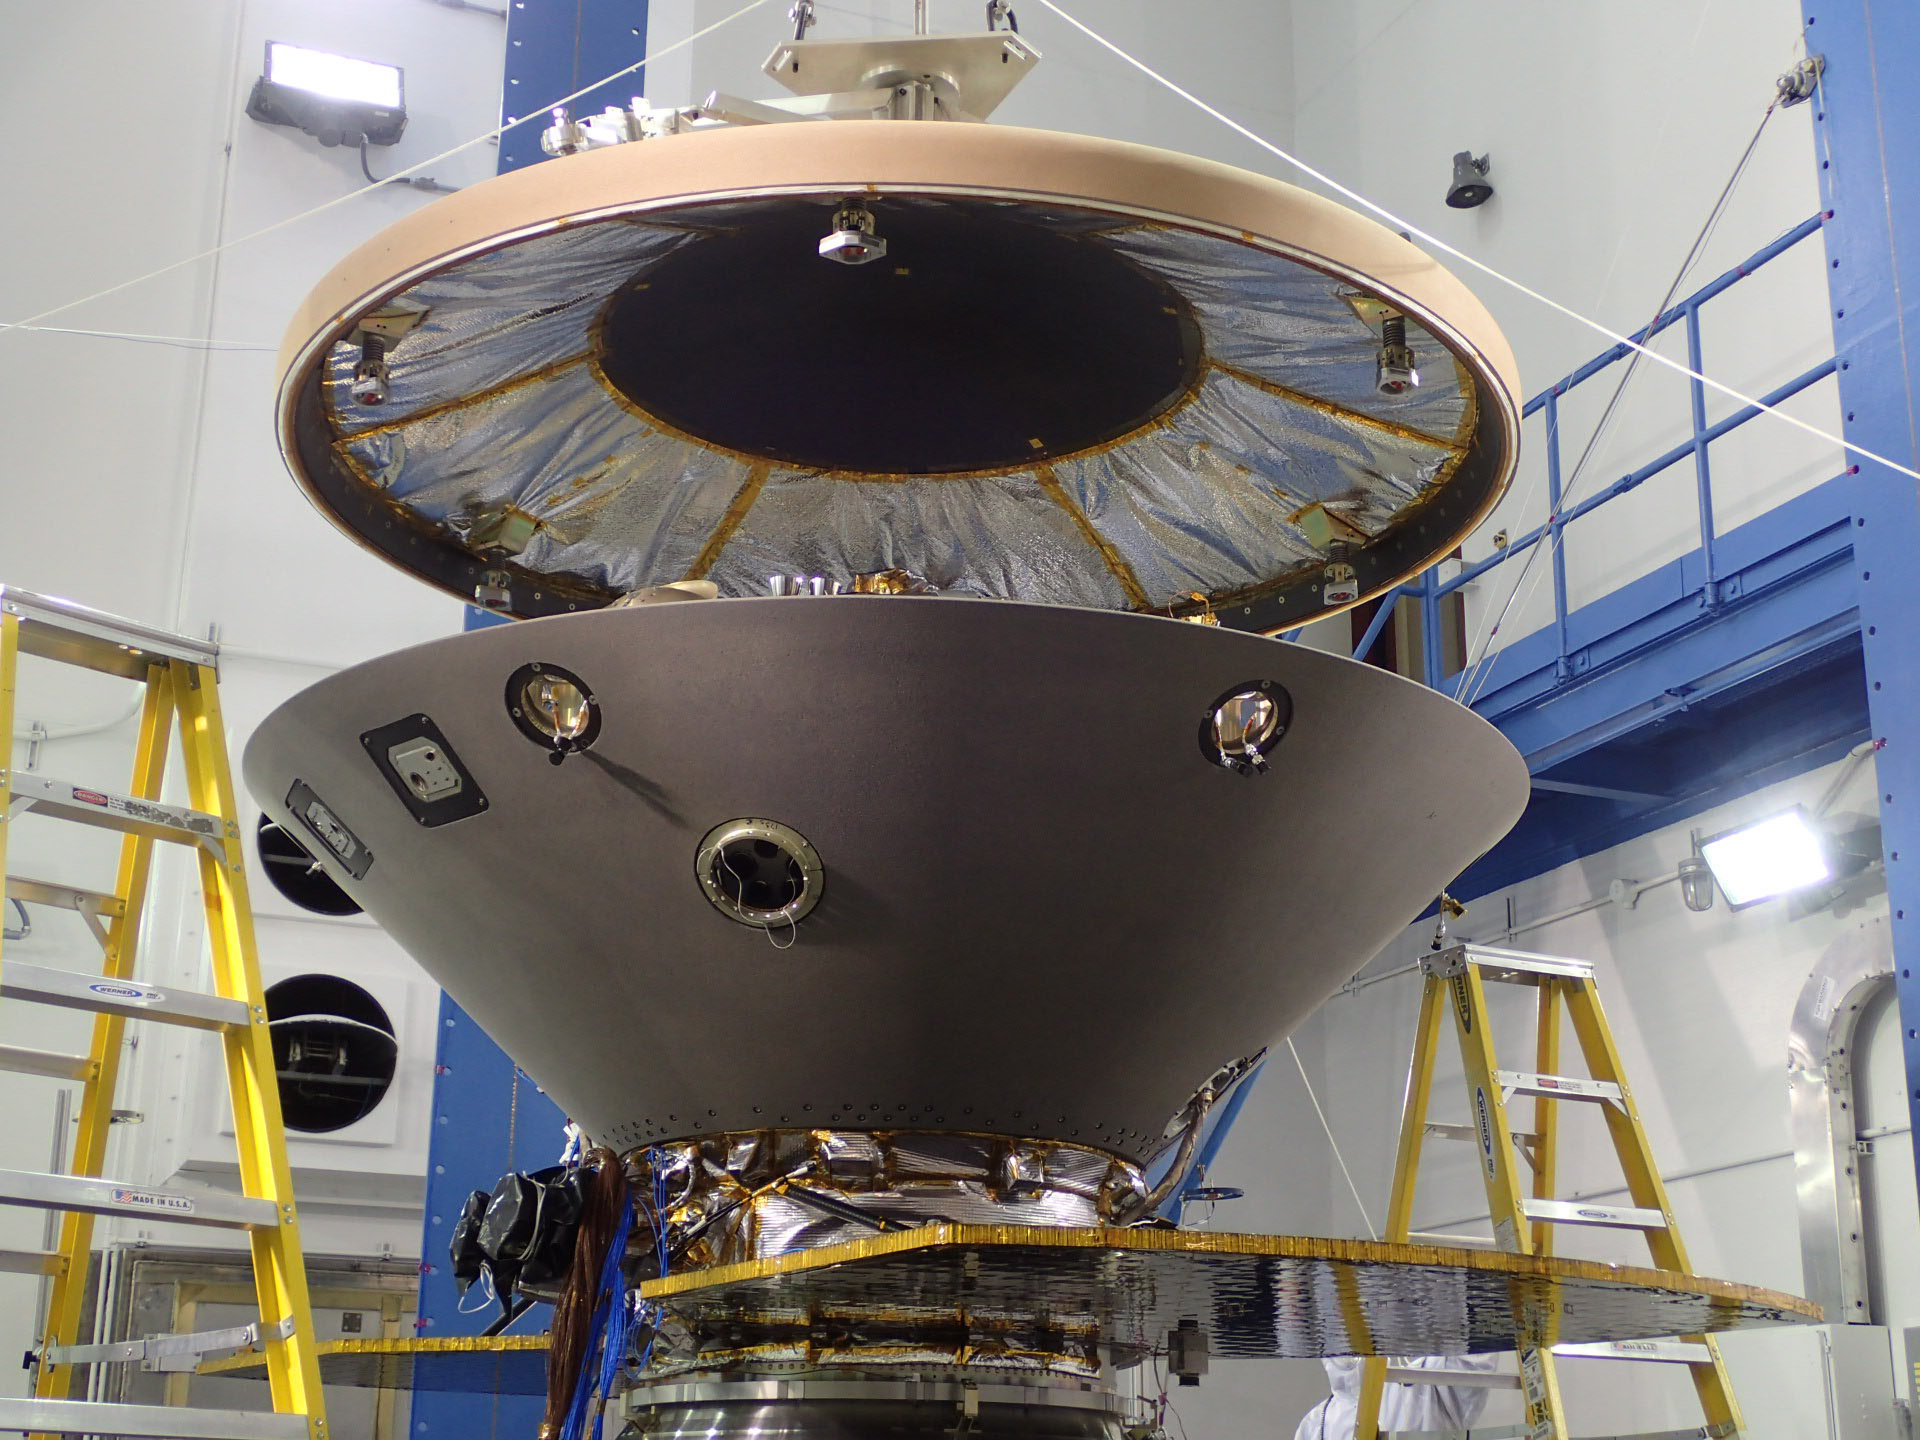 The heat shield is suspended above the rest of the InSight spacecraft in this image taken July 13, 2015, in a spacecraft assembly clean room at Lockheed Martin Space Systems, Denver.